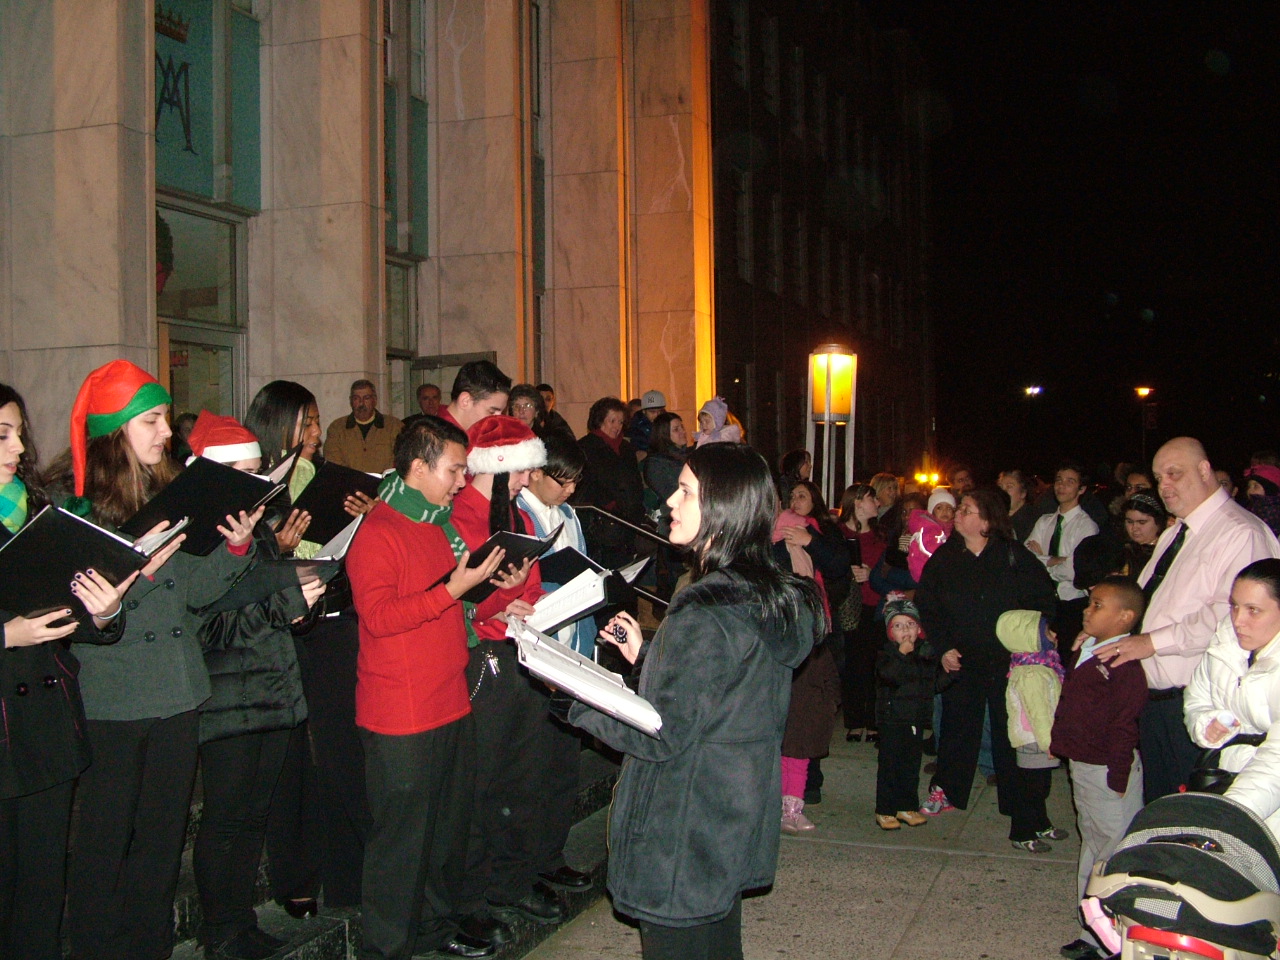 Christ the King R.H.S. held an outdoor tree lighting for the benefit of the entire community.